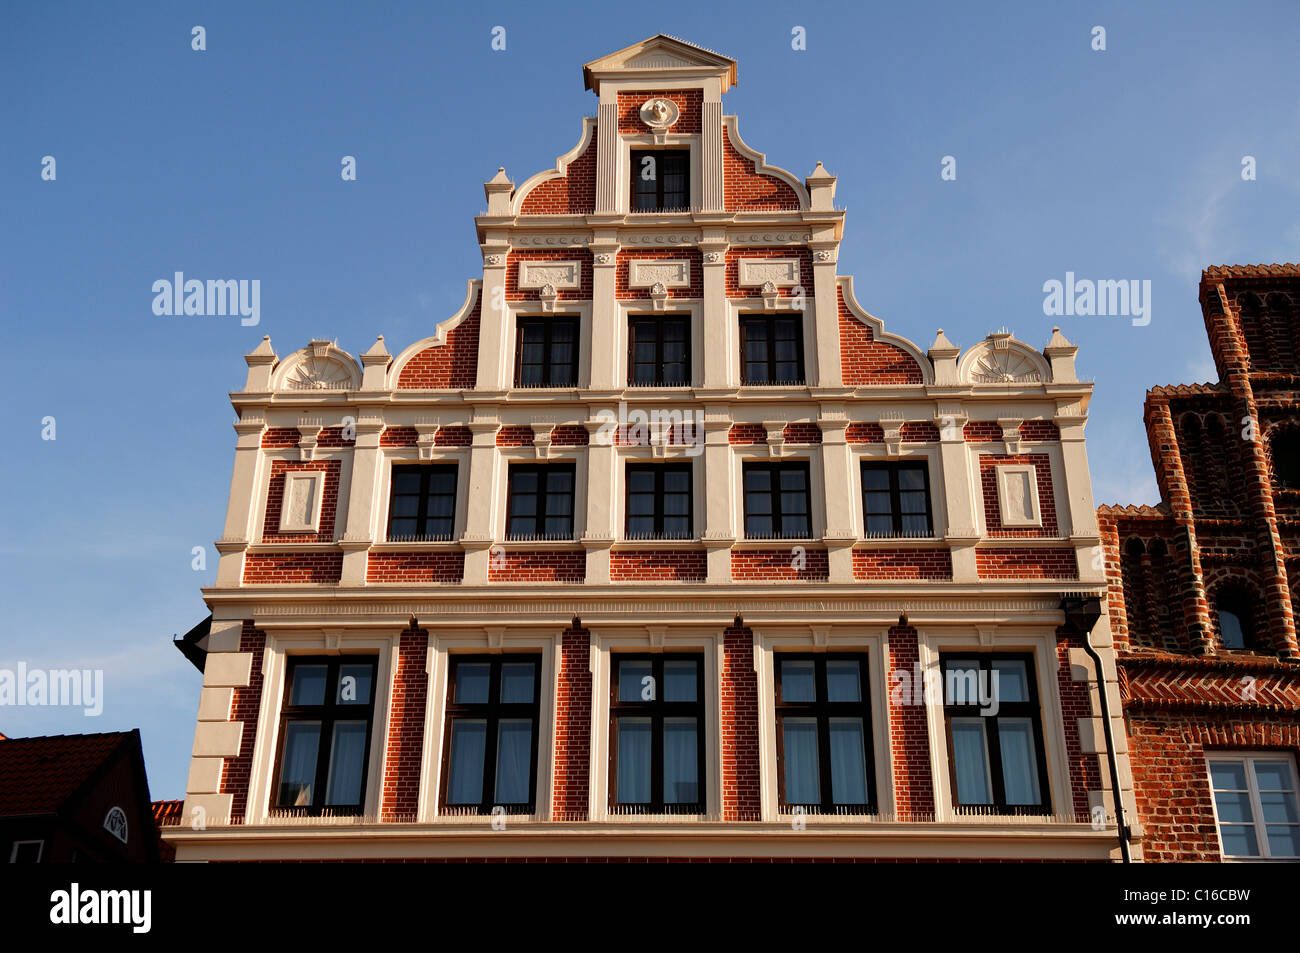 Alte Apotheke High Resolution Stock Photography and Images - Alamy